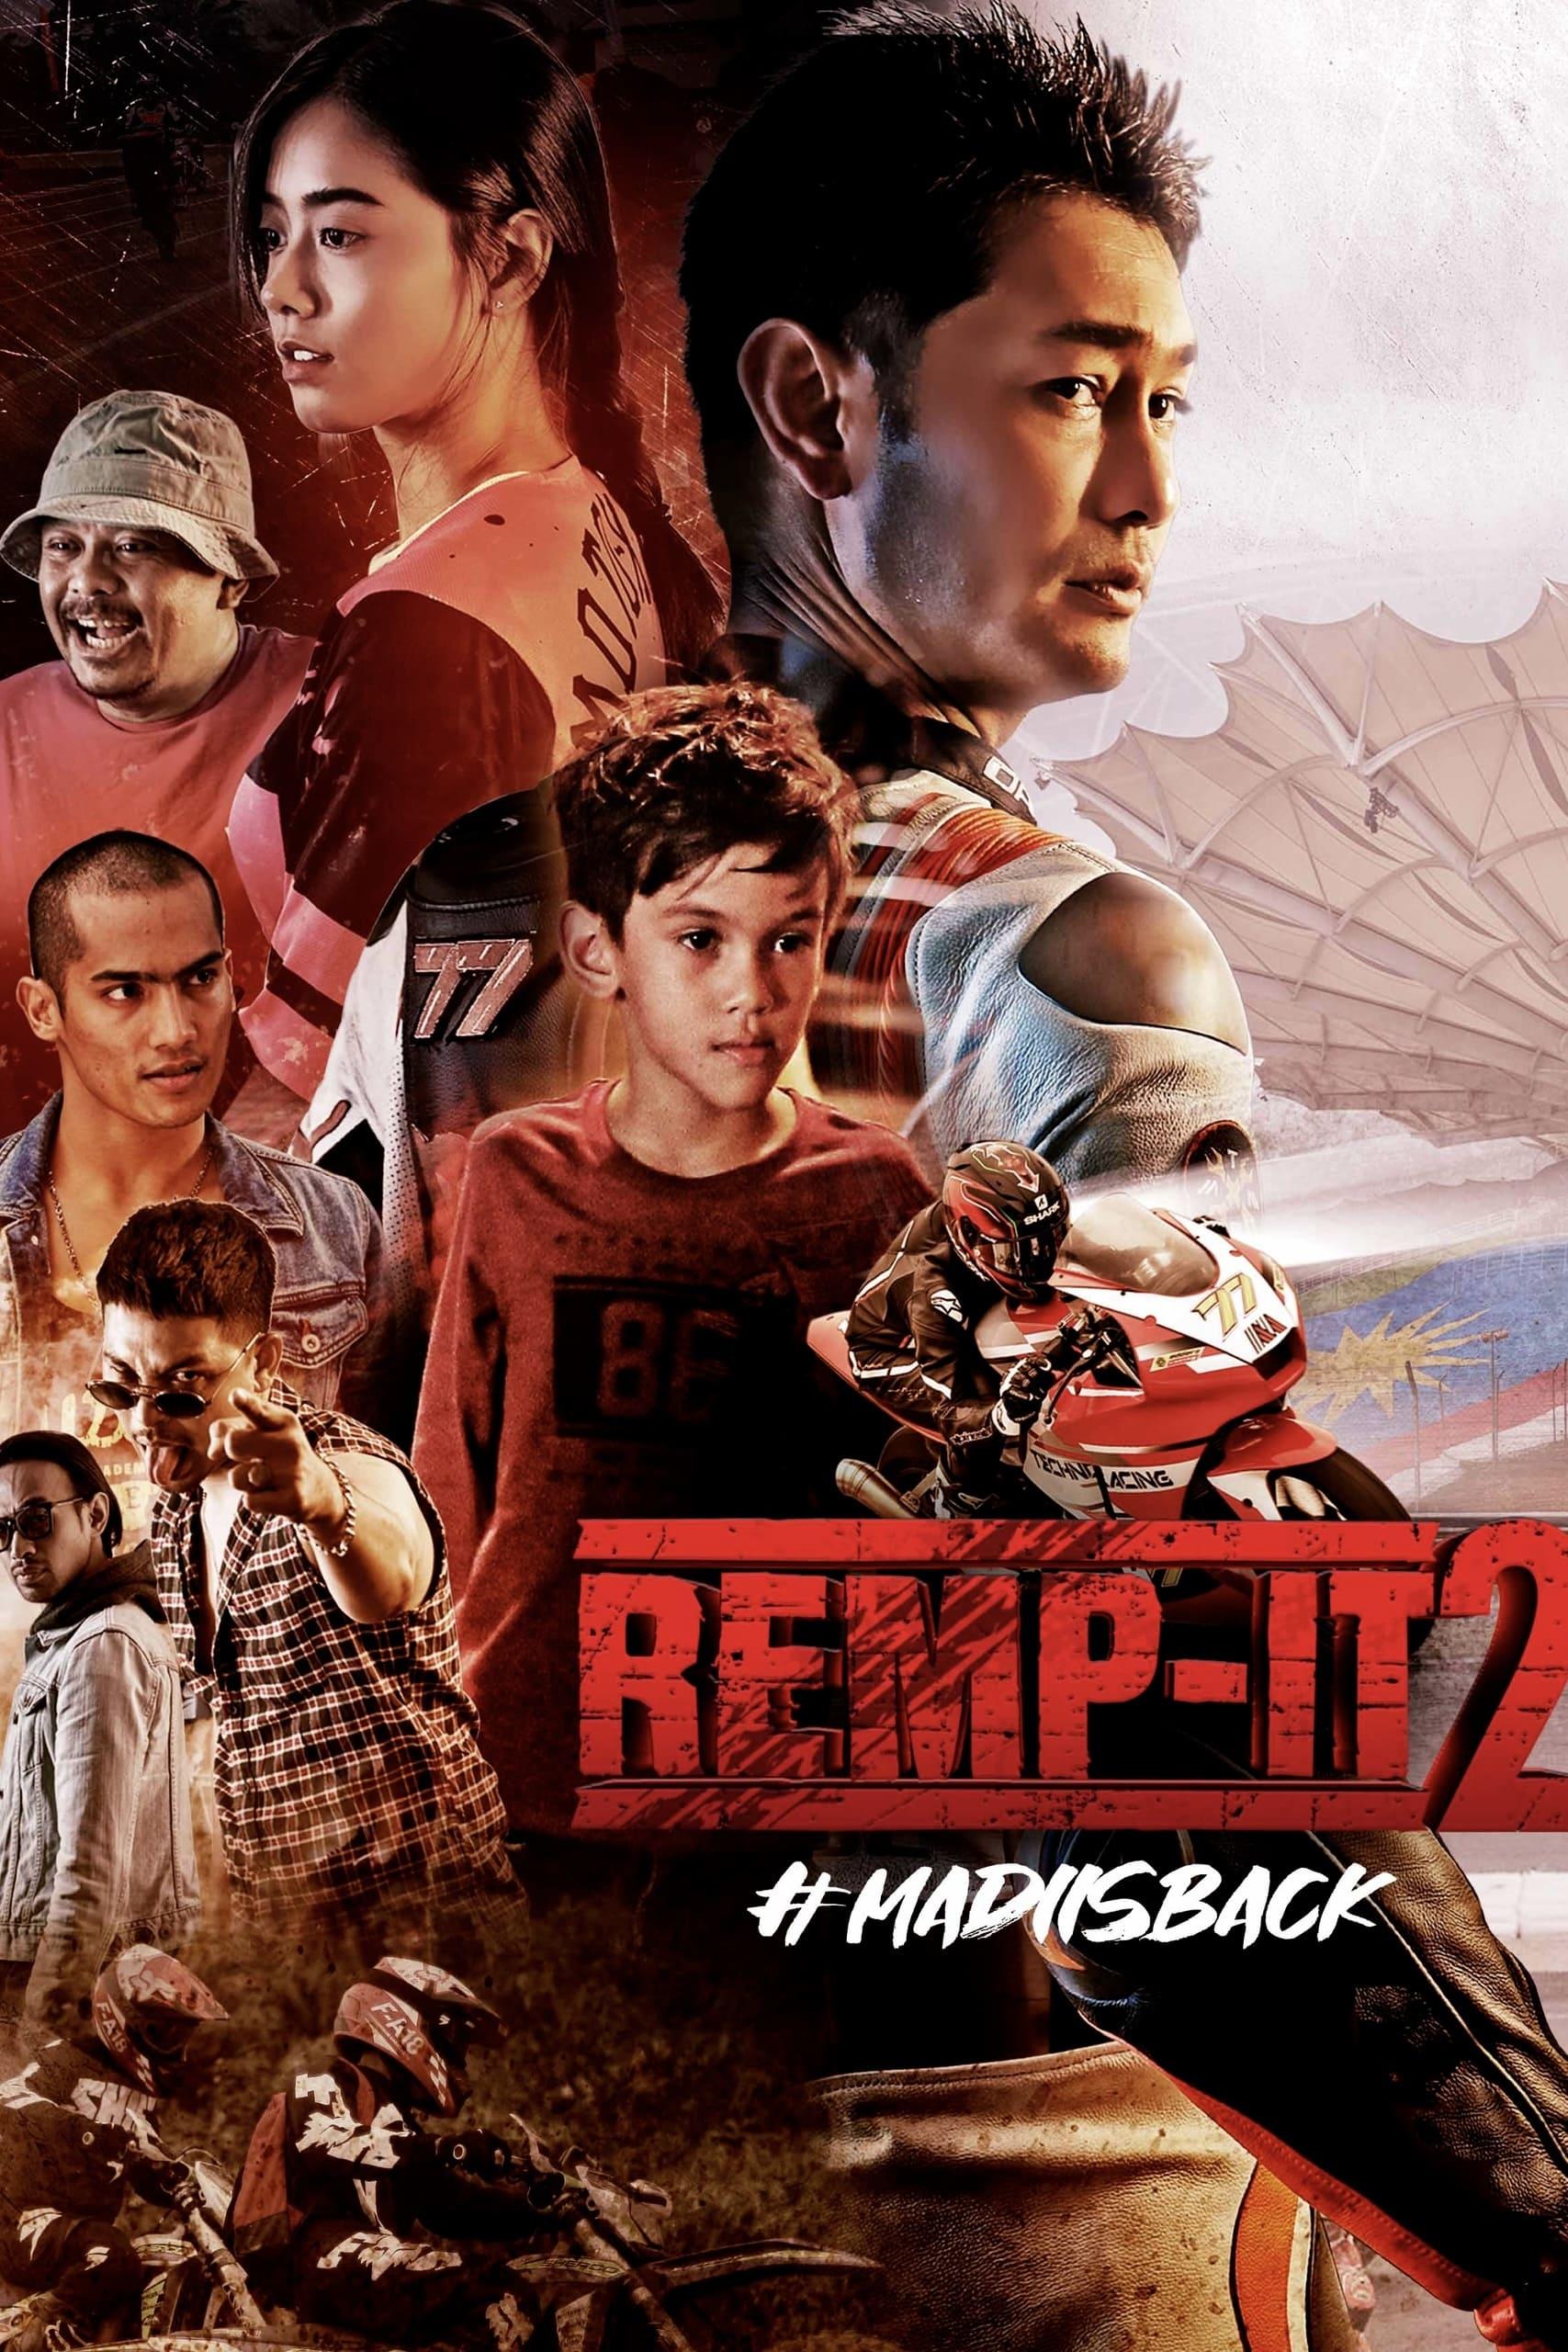 Remp-It 2 poster